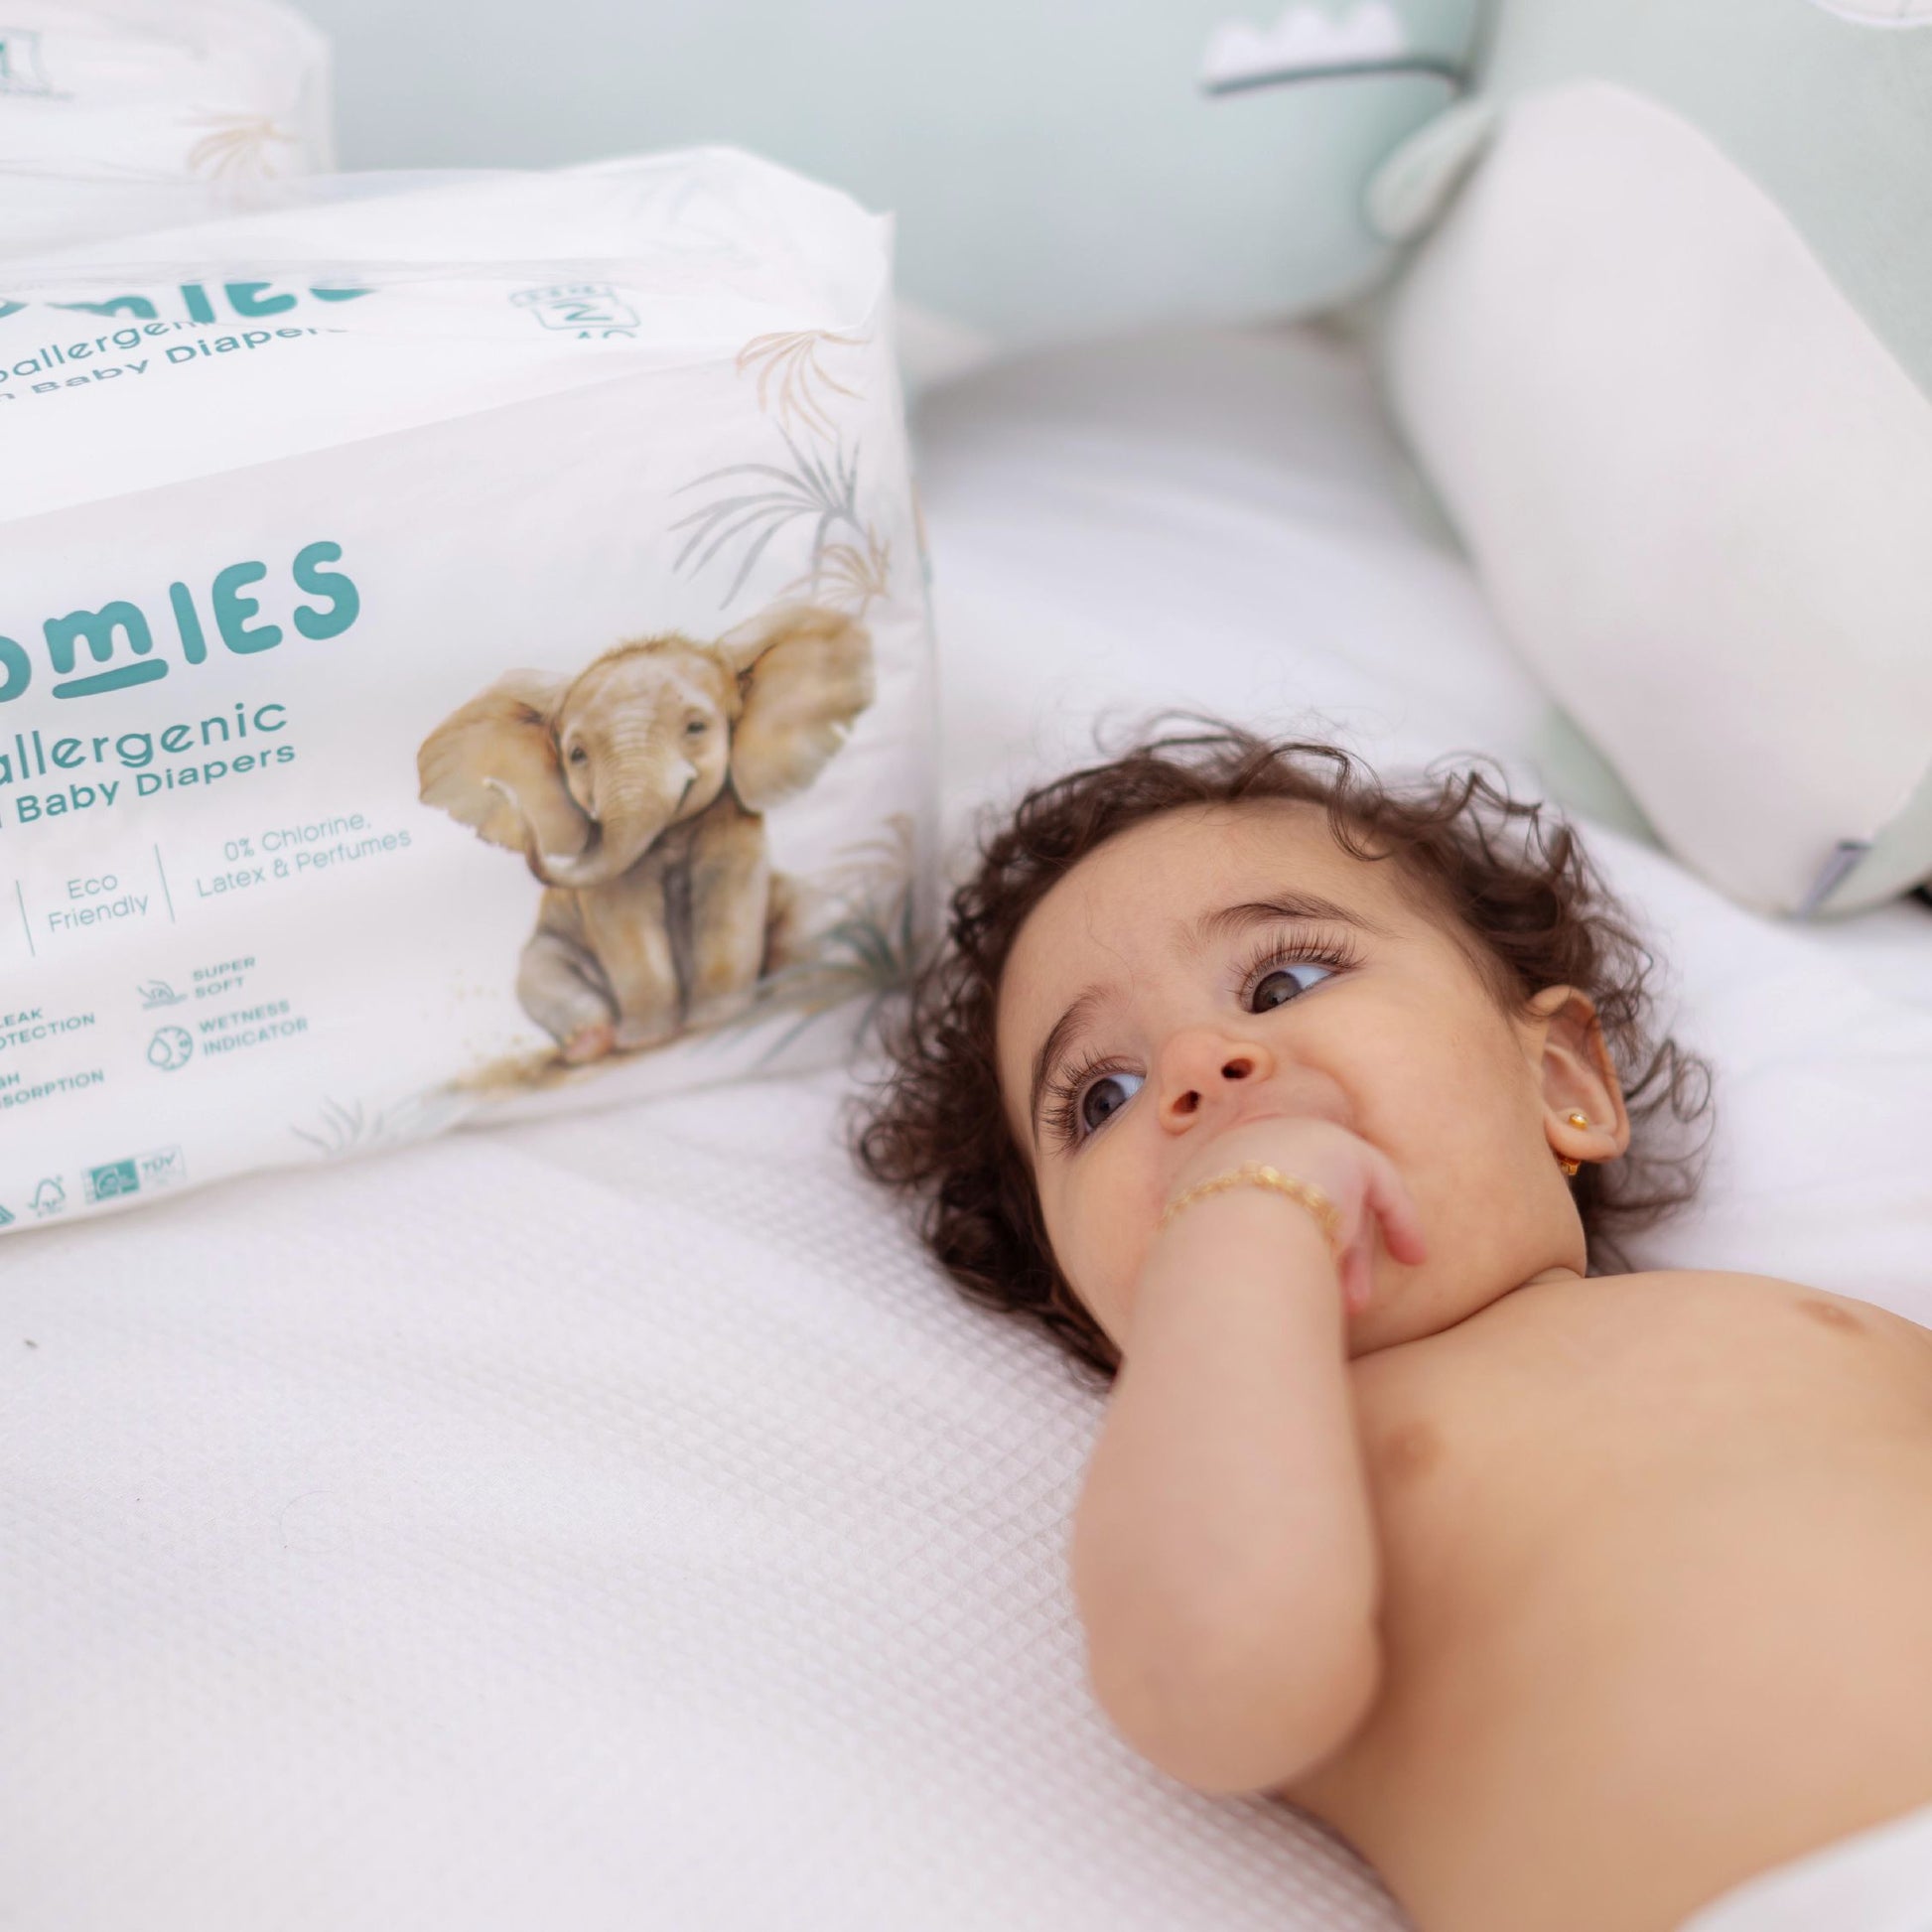 Premium Baby Diapers - with baby picture